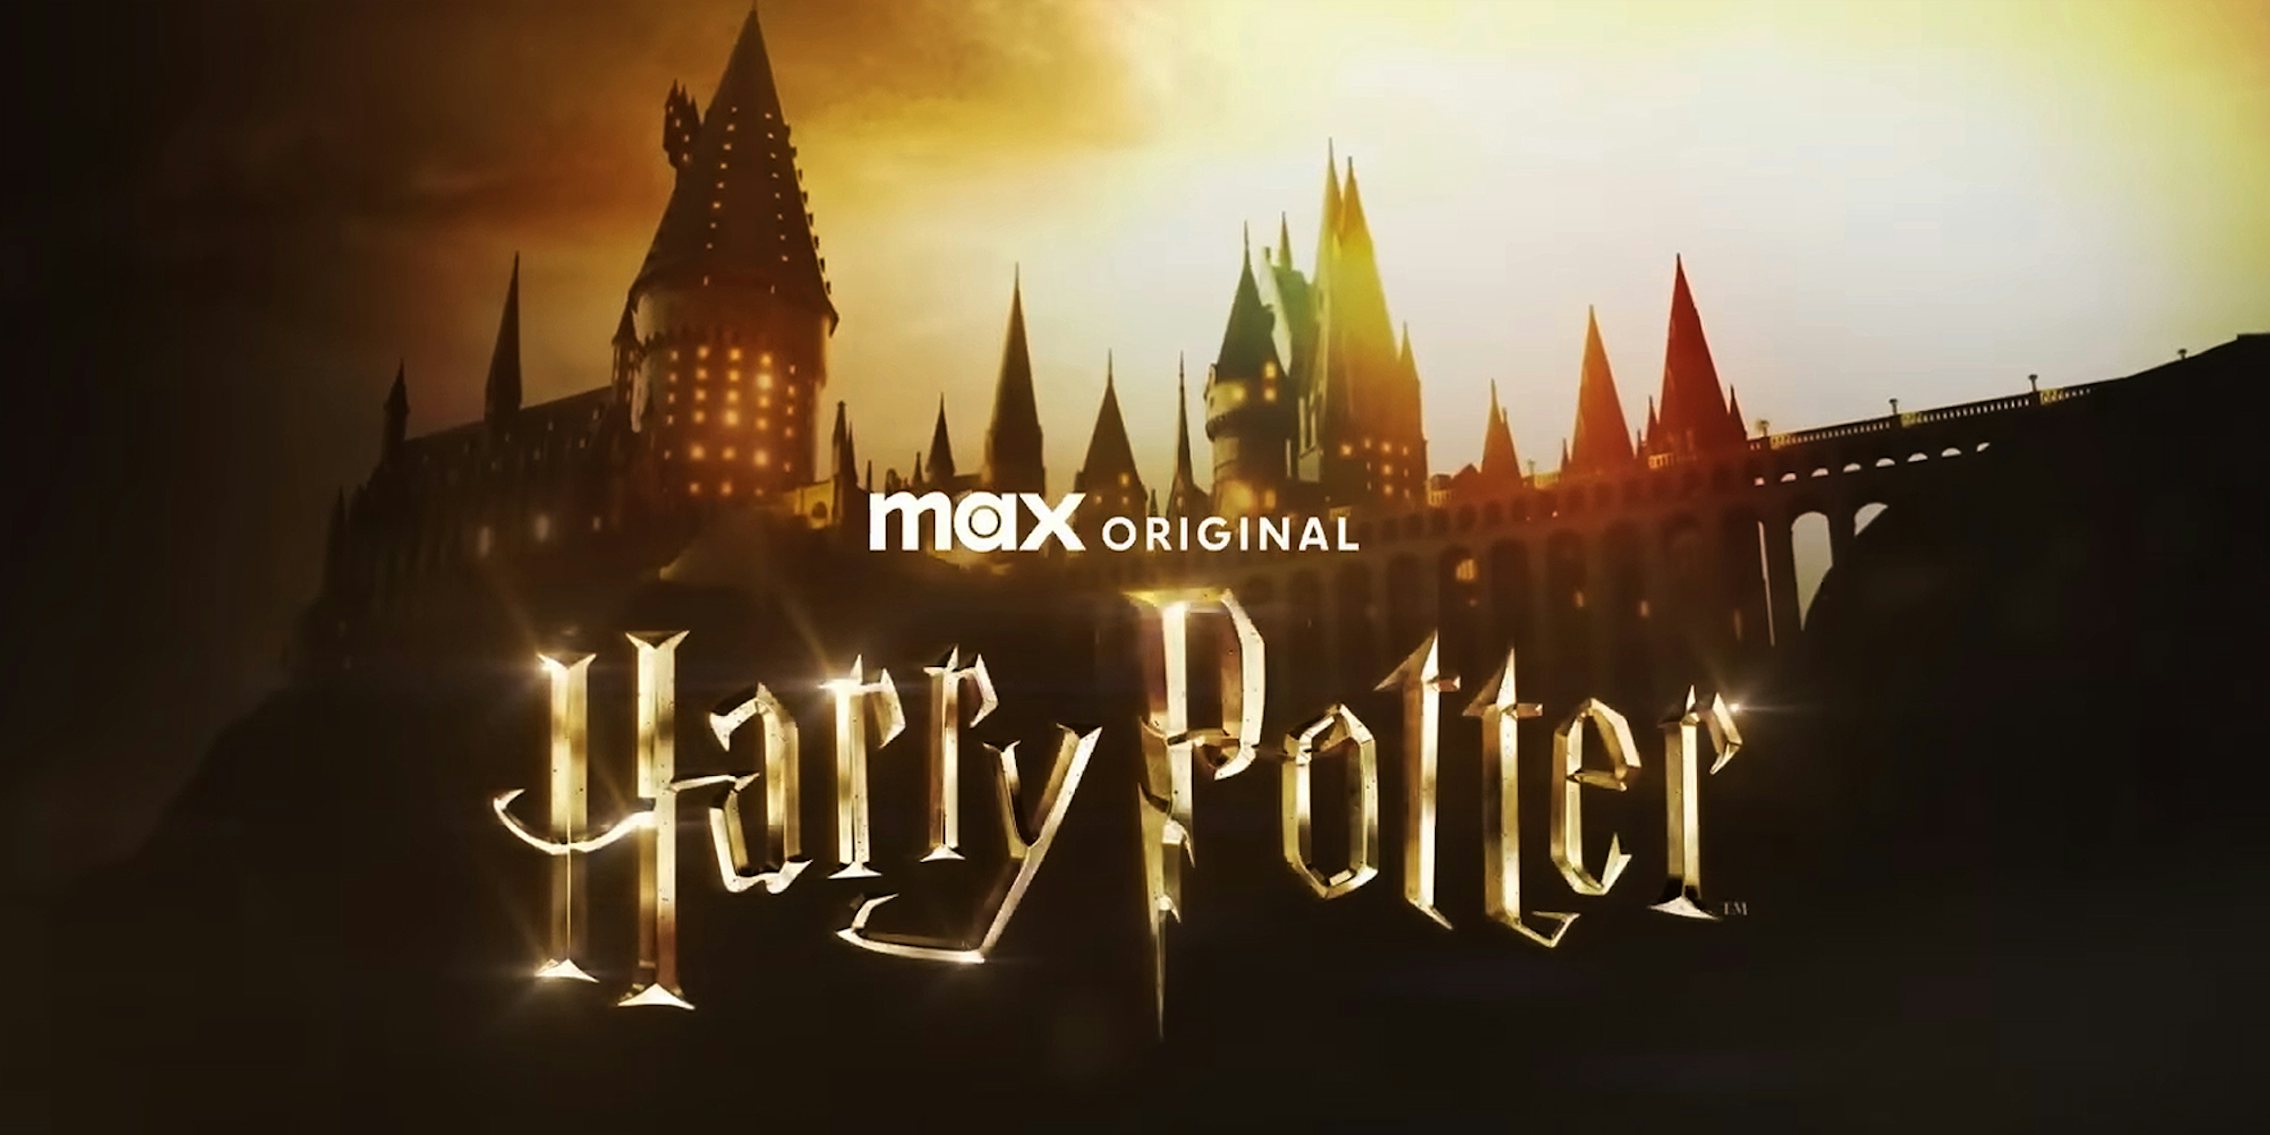 HBO Max Harry Potter trailer with logo and castle